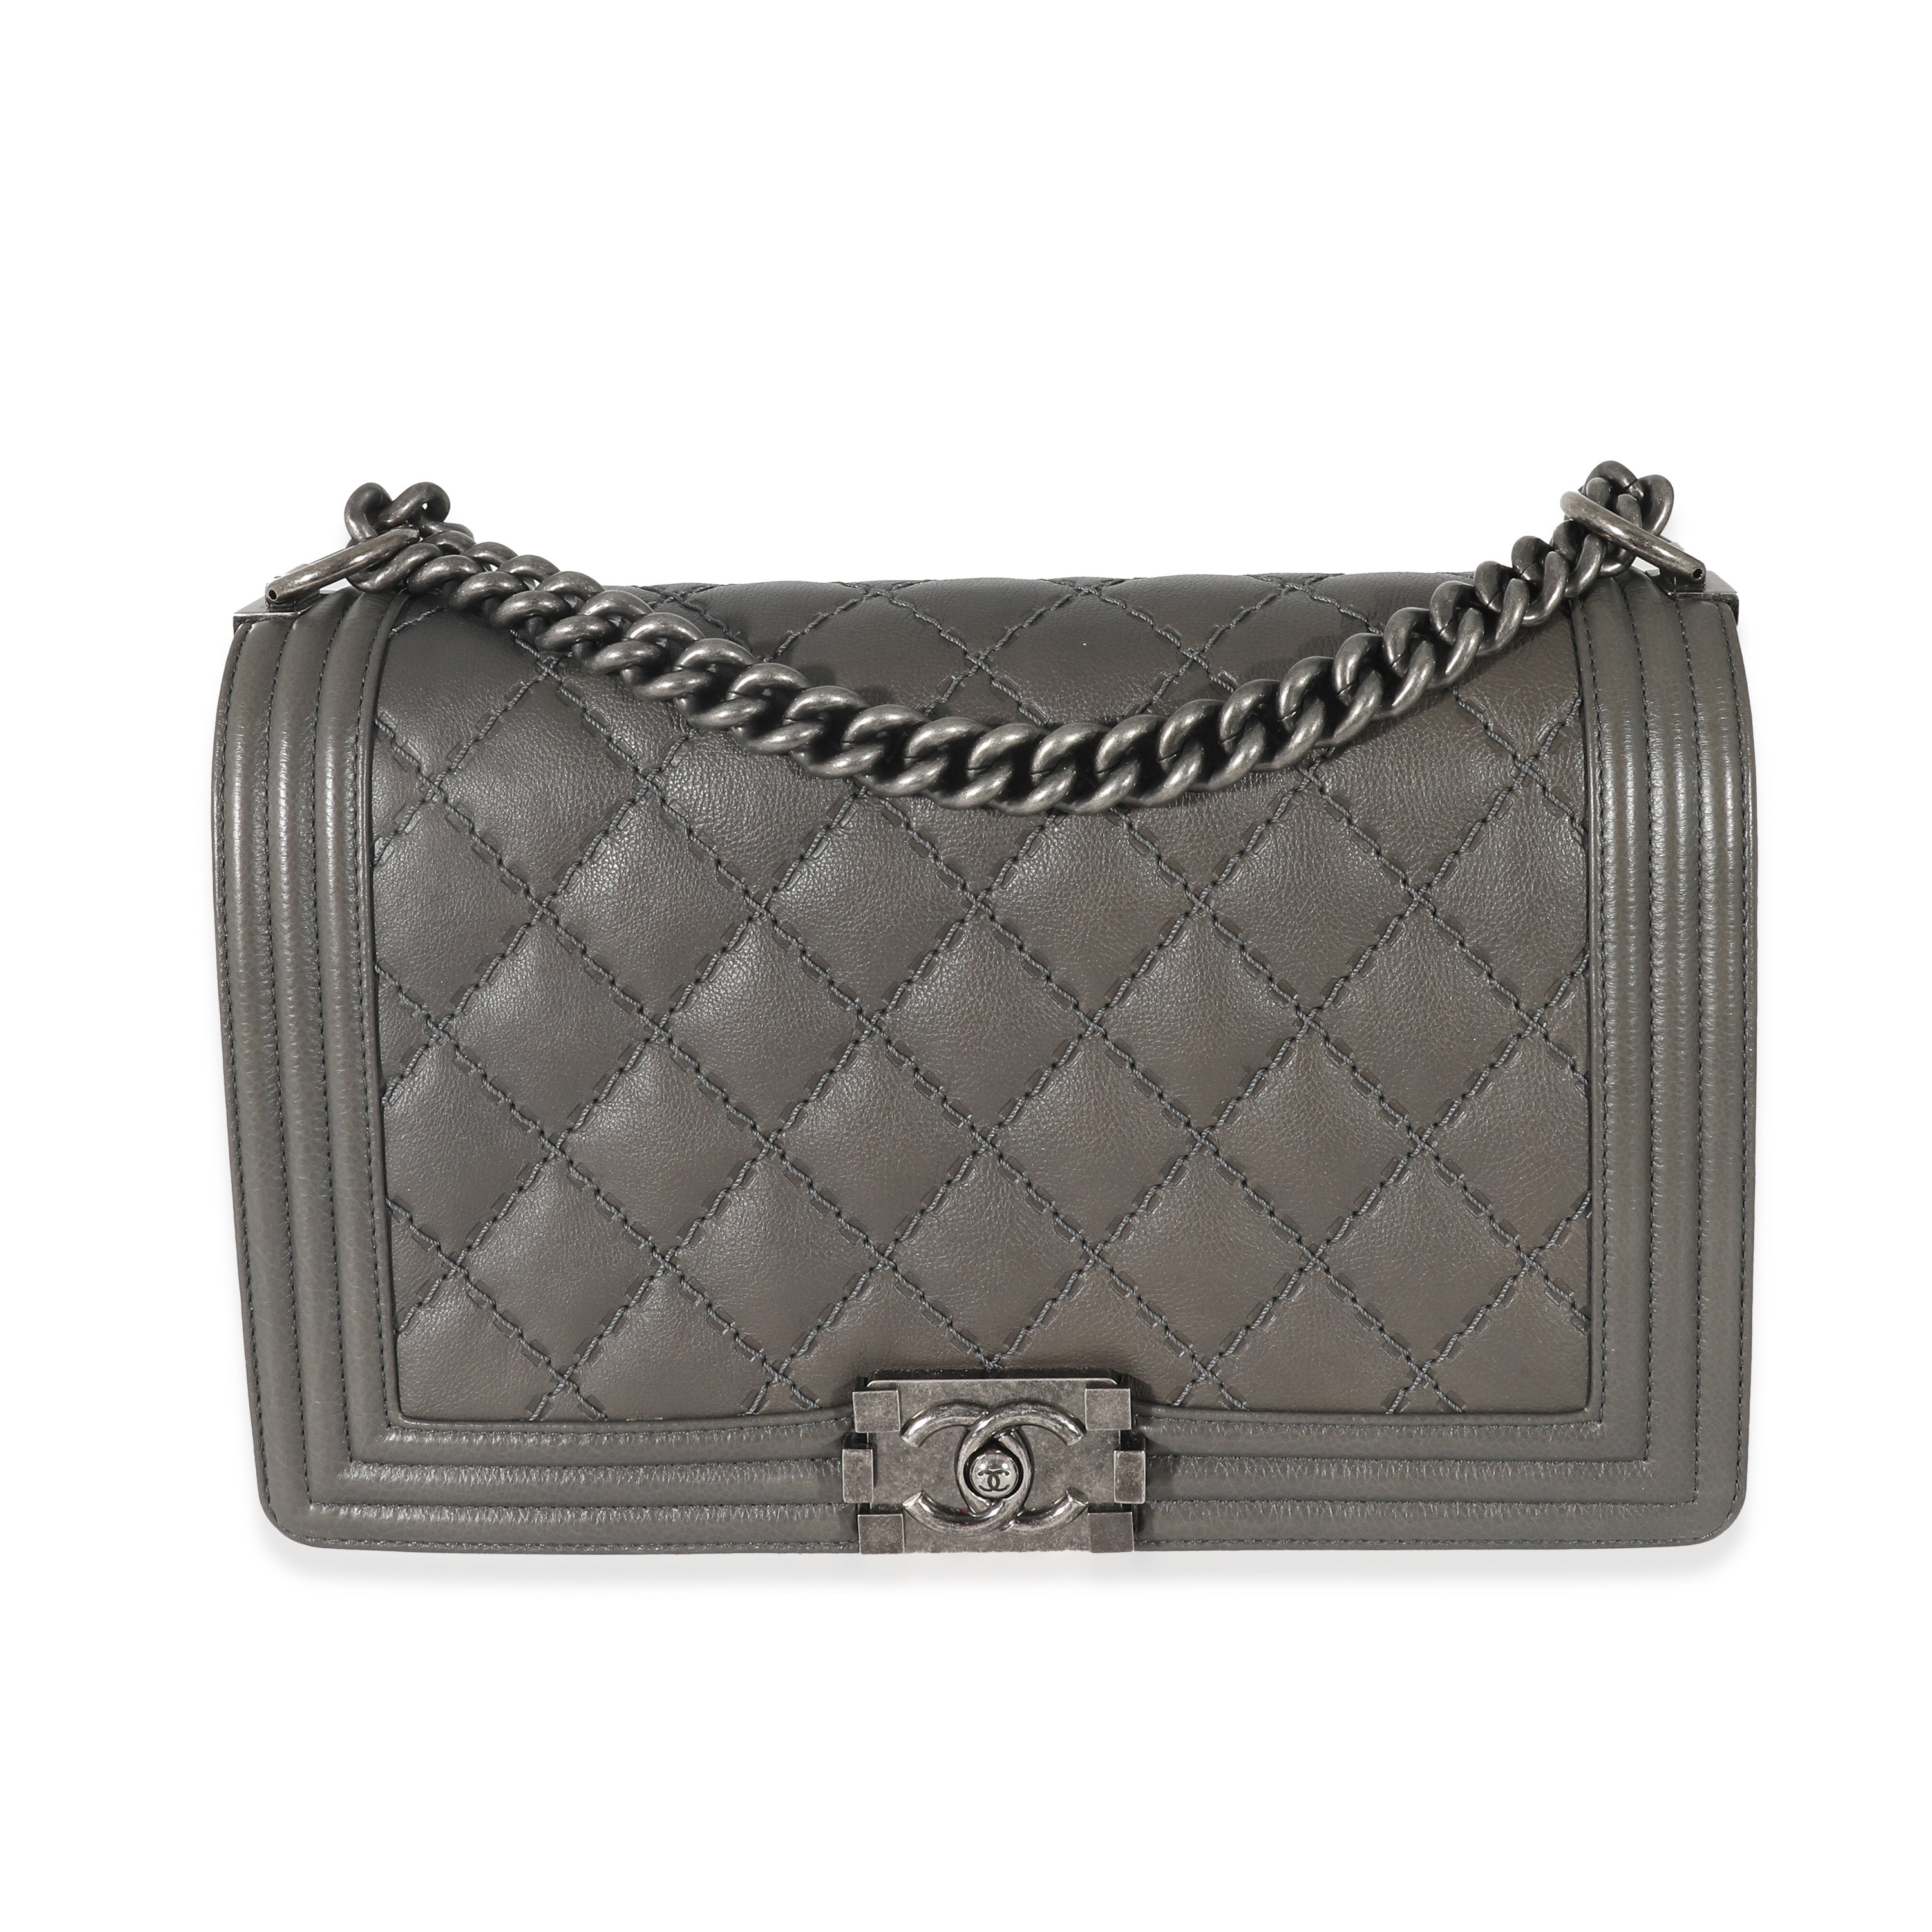 CHANEL WHIPSTITCH FLAP BAG